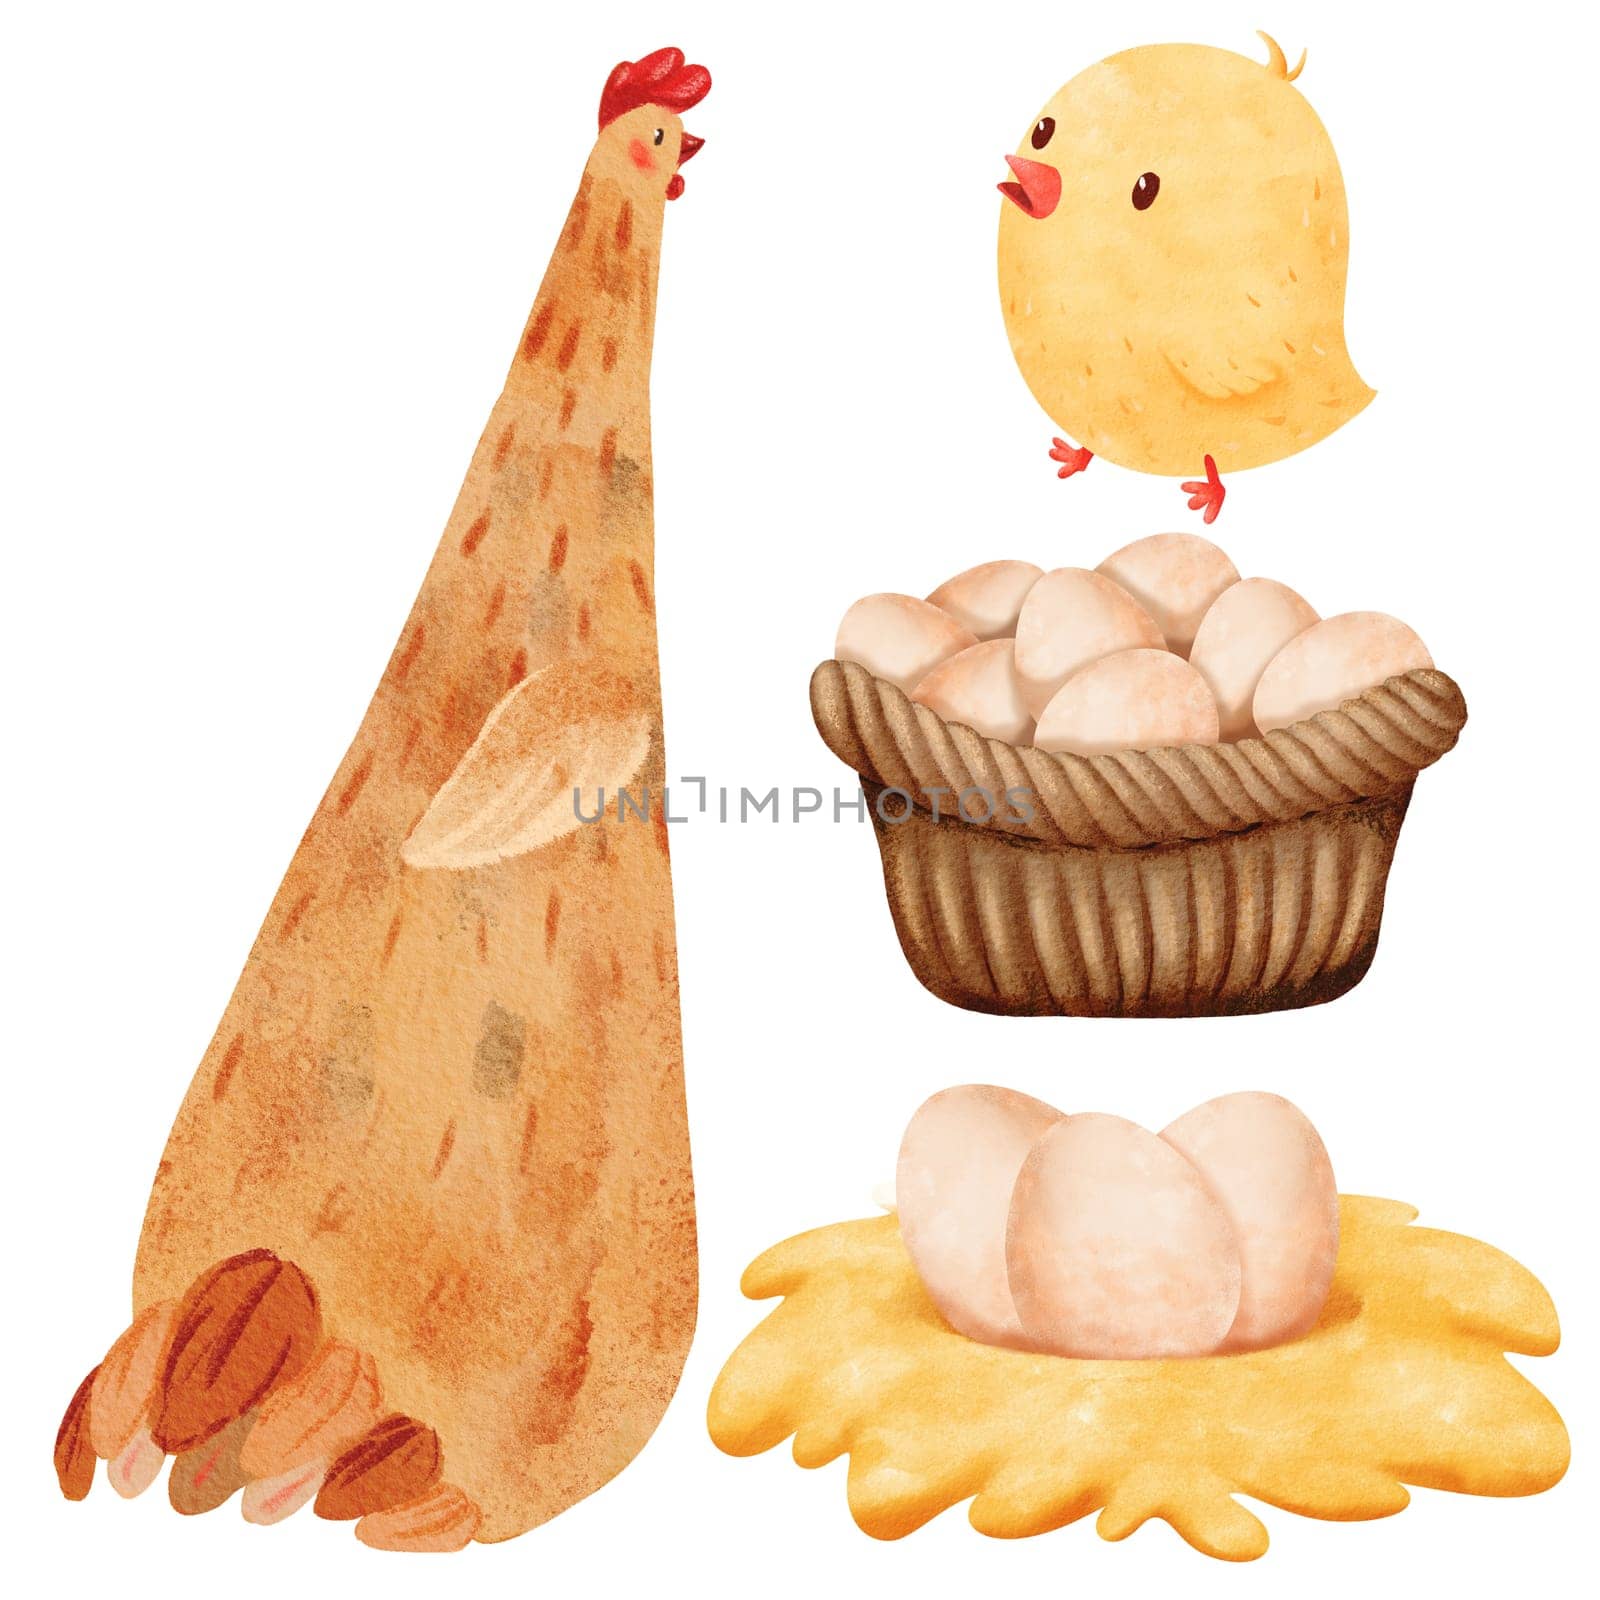 watercolor set featuring adorable chicks, hens, eggs in a basket, and eggs in a nest. farm theme, for various occasions, including birthdays and Easter. The illustrations in a playful cartoon style by Art_Mari_Ka